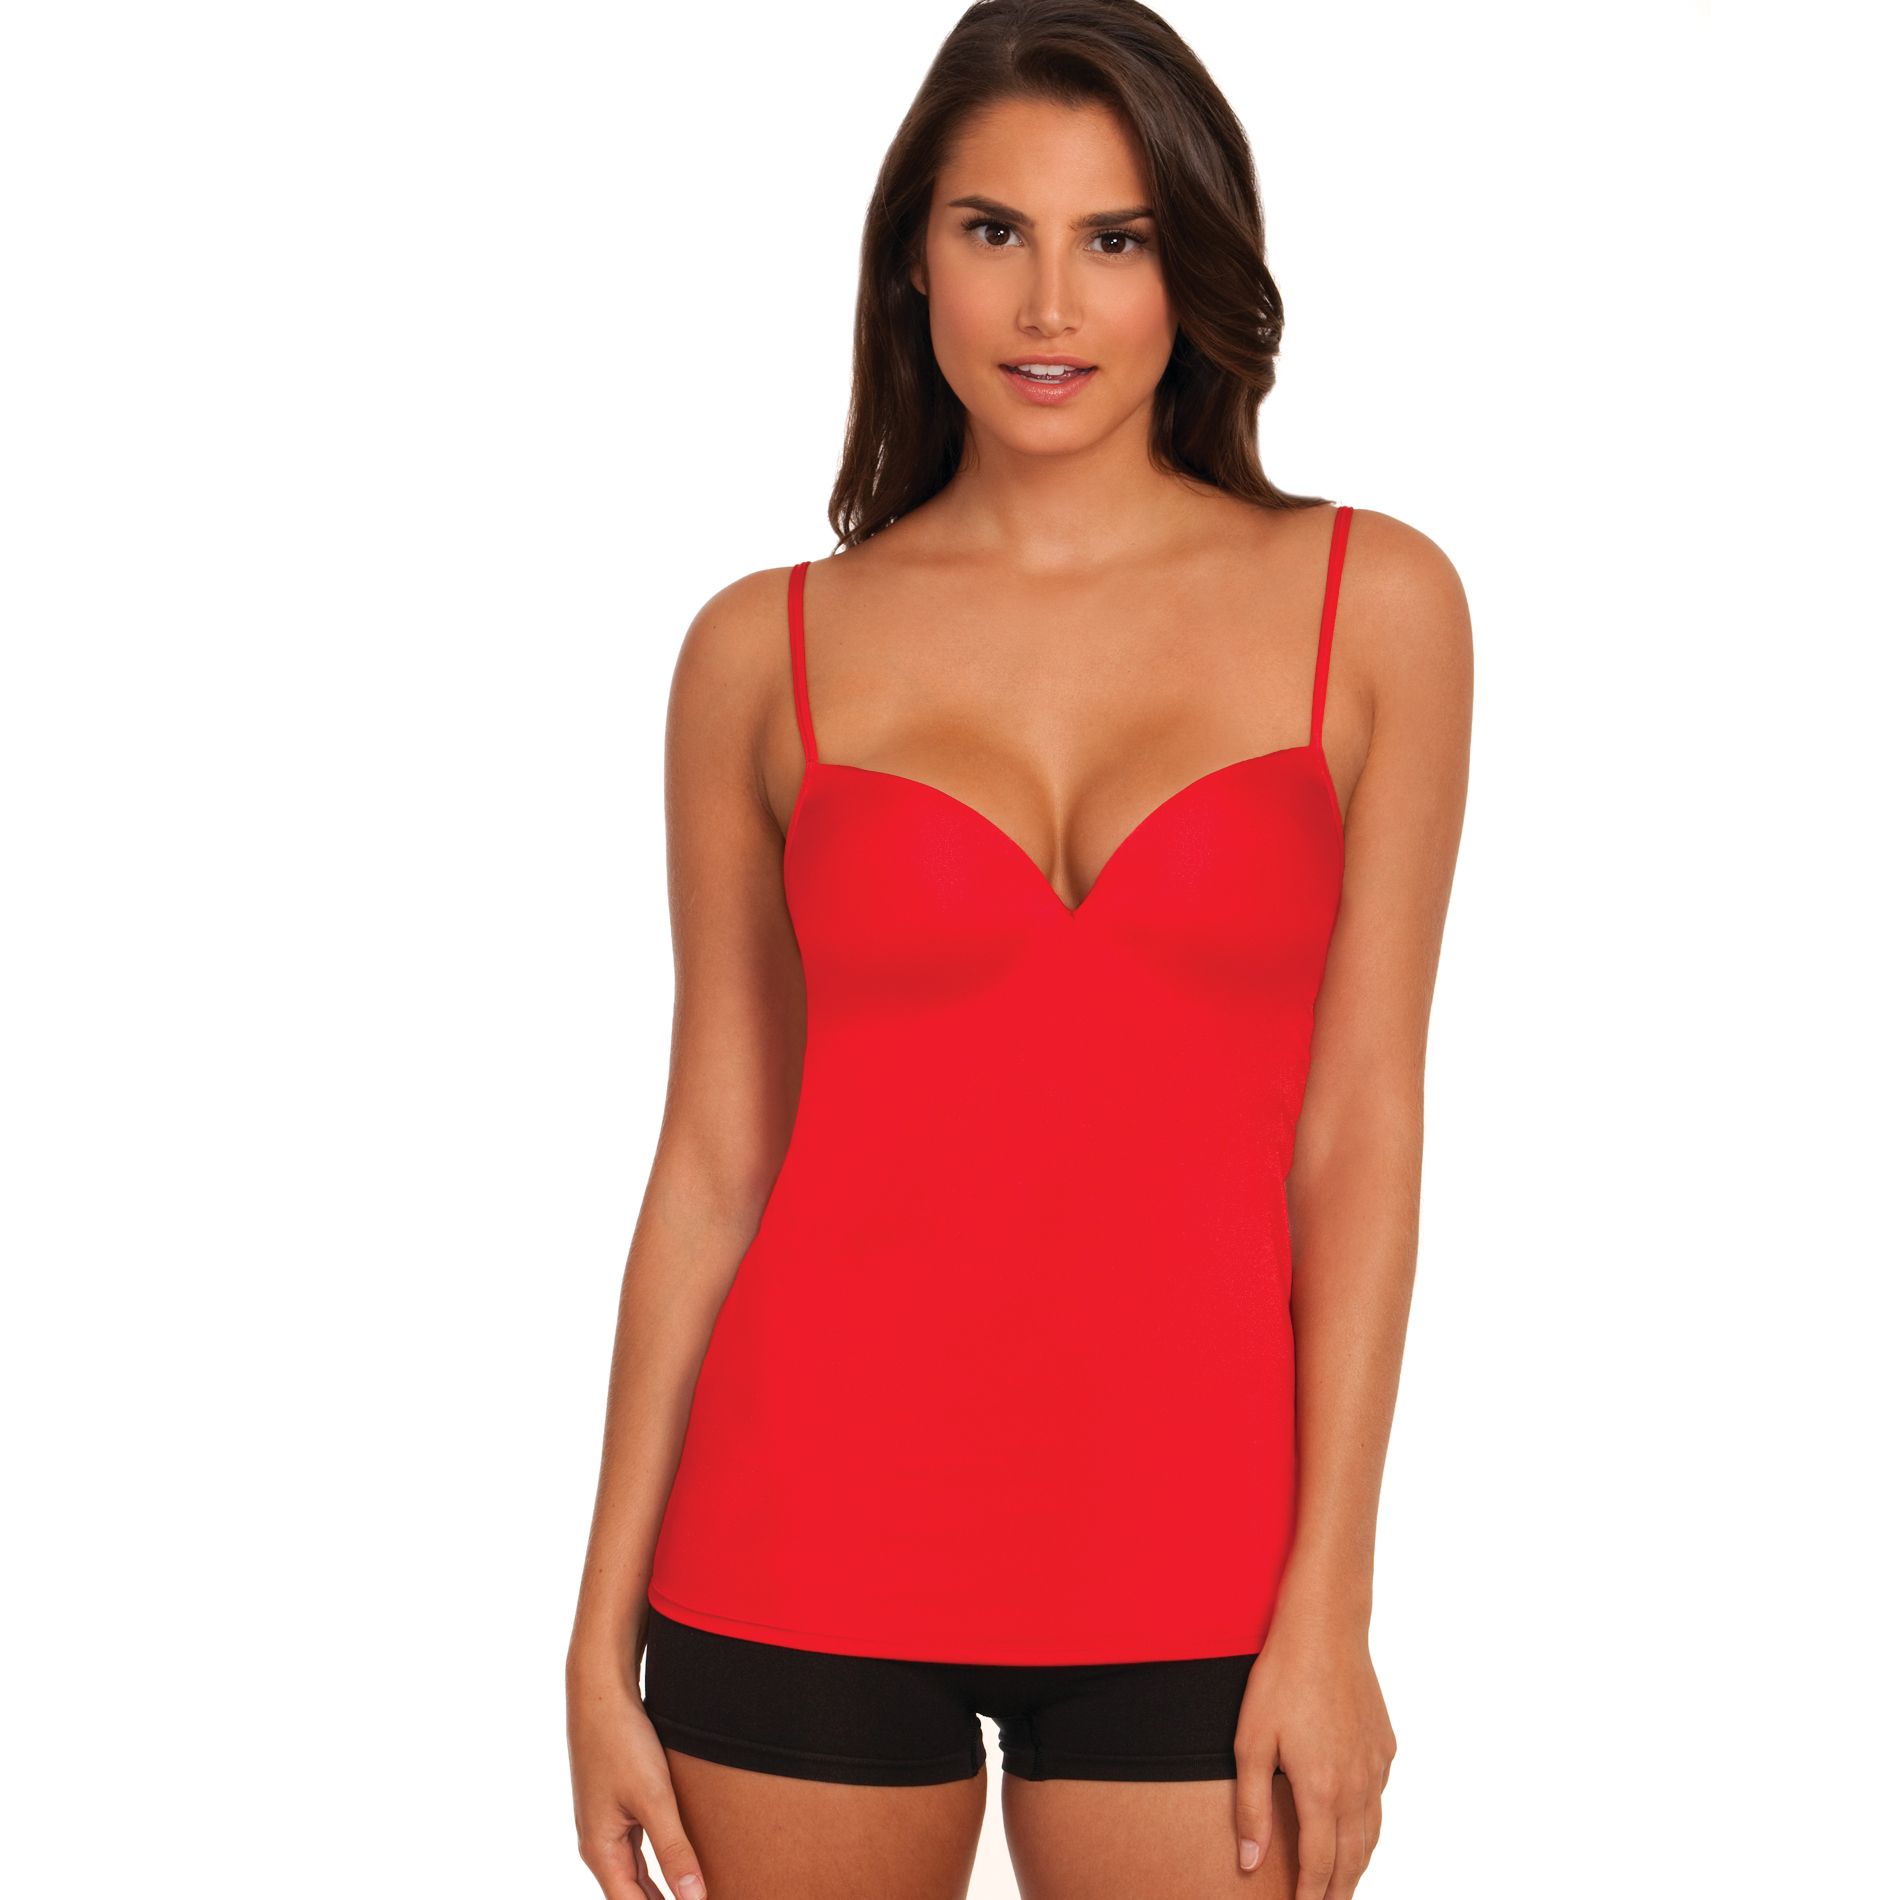 Joe Boxer Women's Camisole Cleavage to the Max